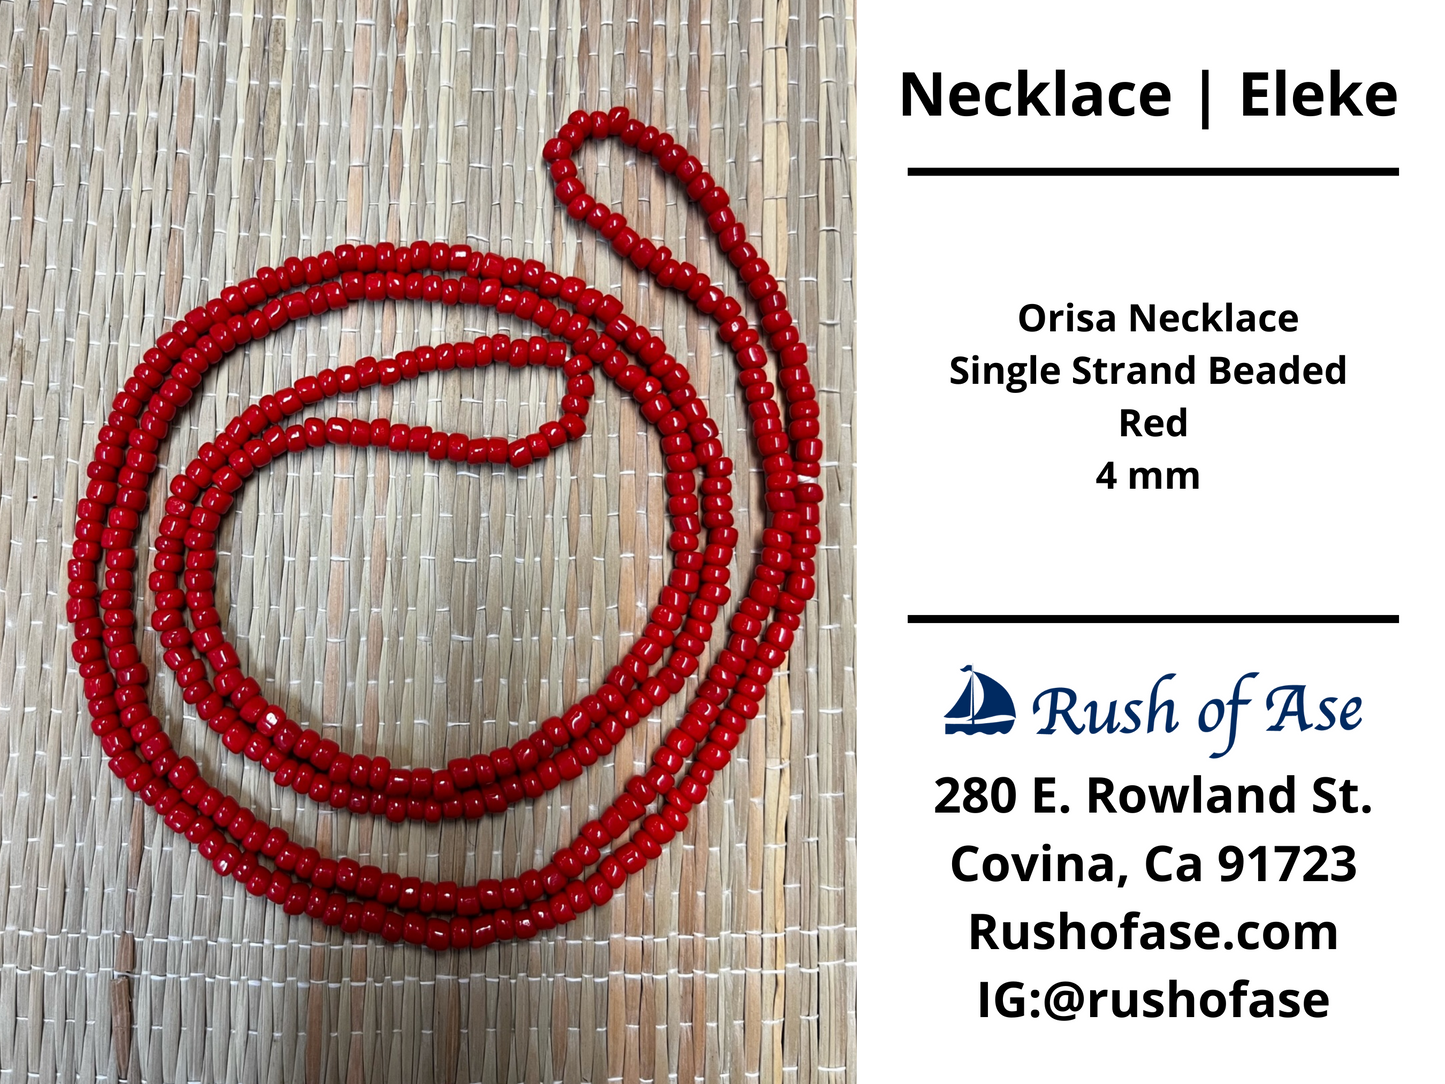 Necklaces | Eleke | Orisa Necklace - Single Strand Beaded Necklace - 4mm | Red